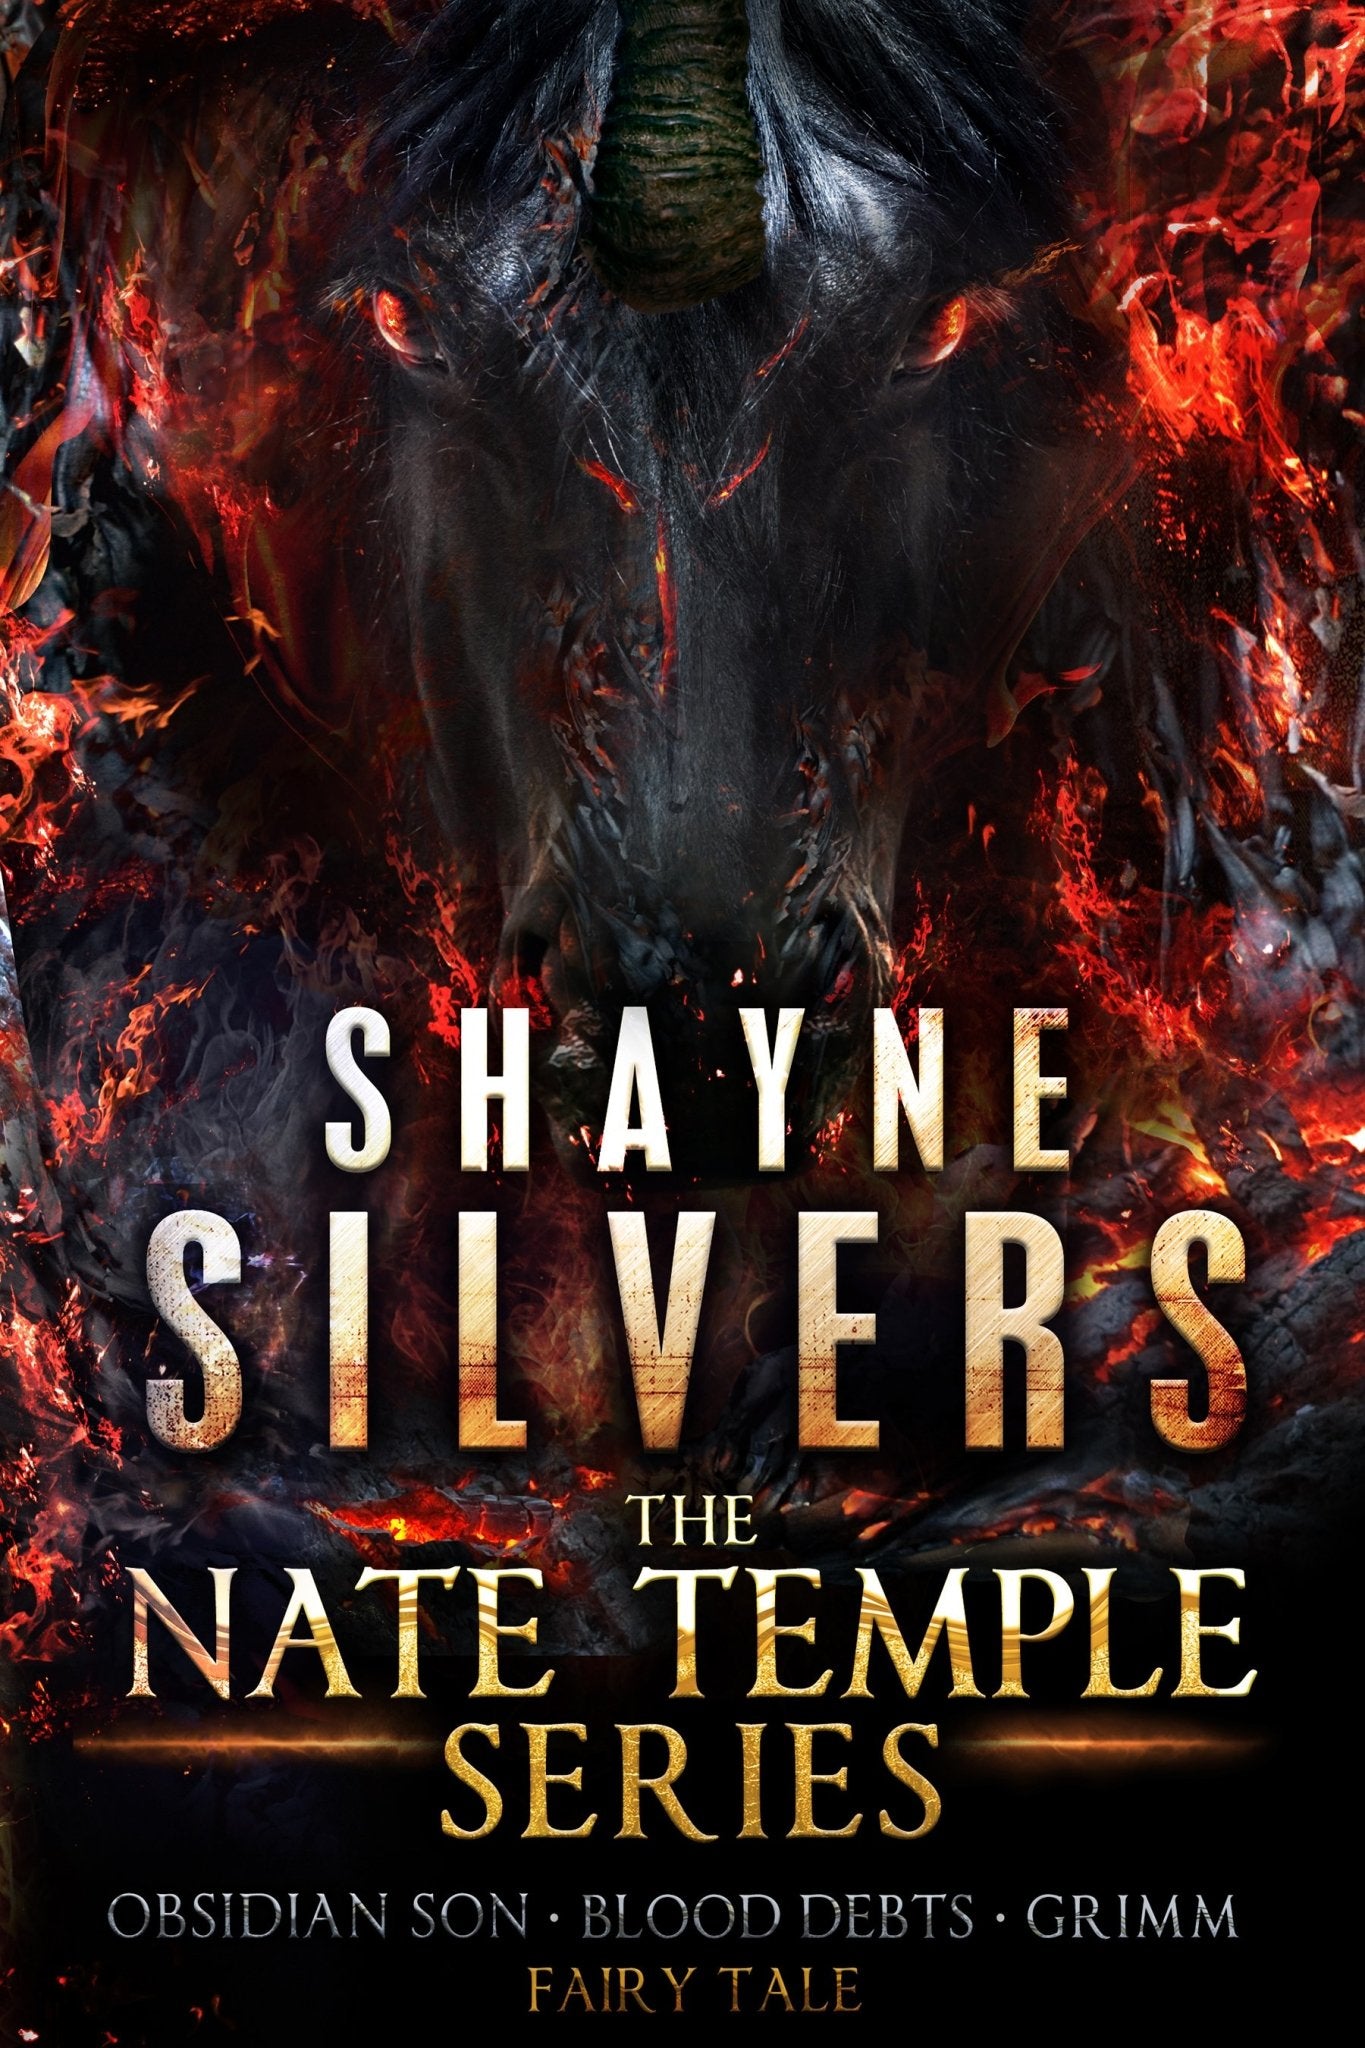 The Nate Temple Series: Books 0-3 (The Nate Temple Series Boxsets) - Temple Verse Gear